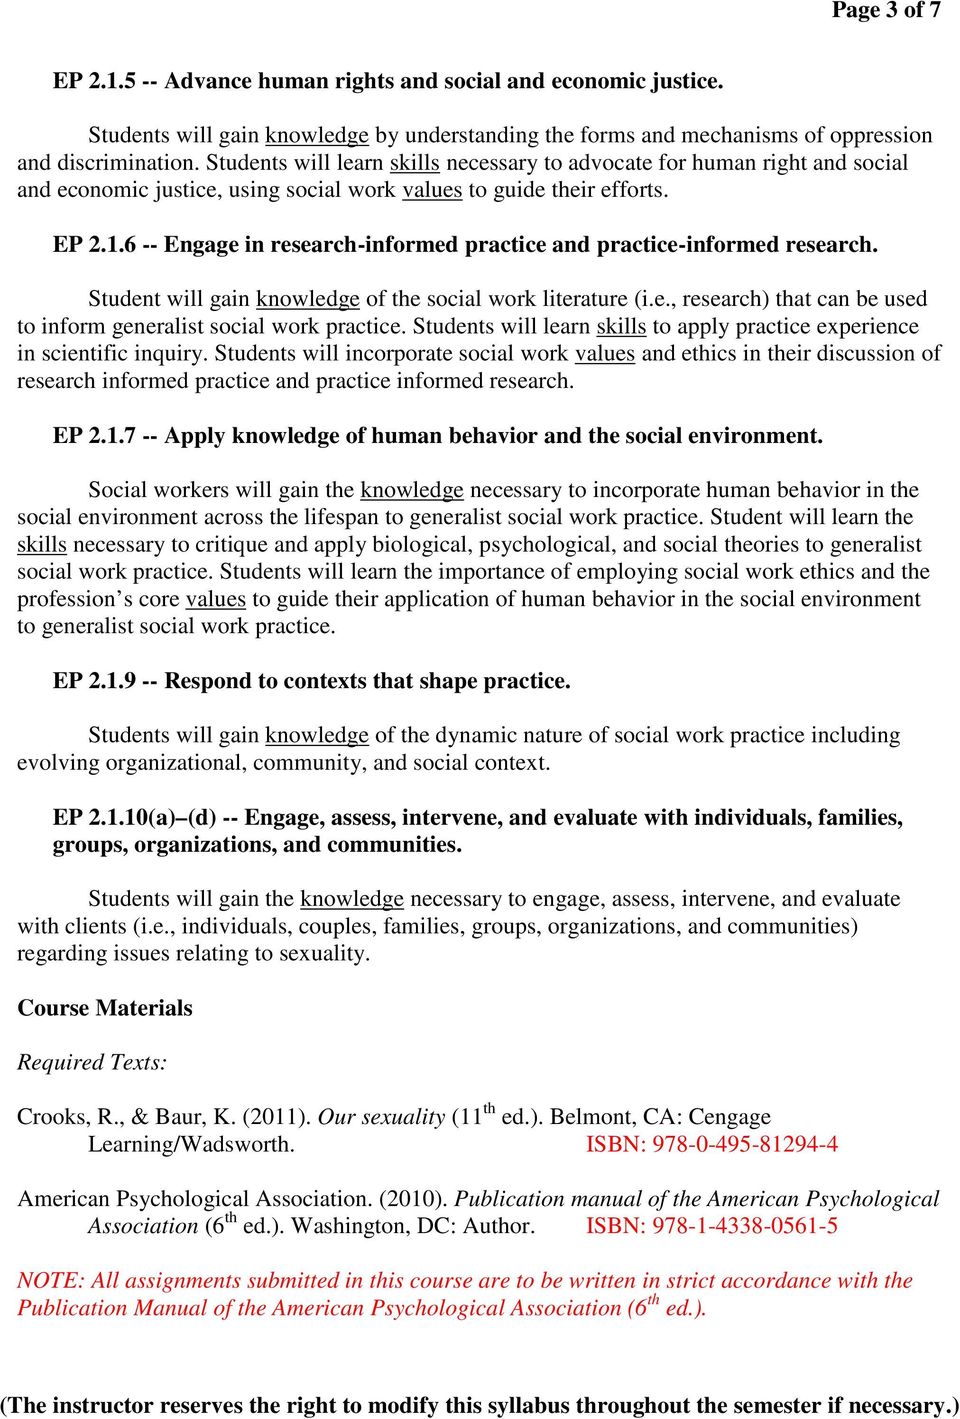 6 -- Engage in research-informed practice and practice-informed research. Student will gain knowledge of the social work literature (i.e., research) that can be used to inform generalist social work practice.